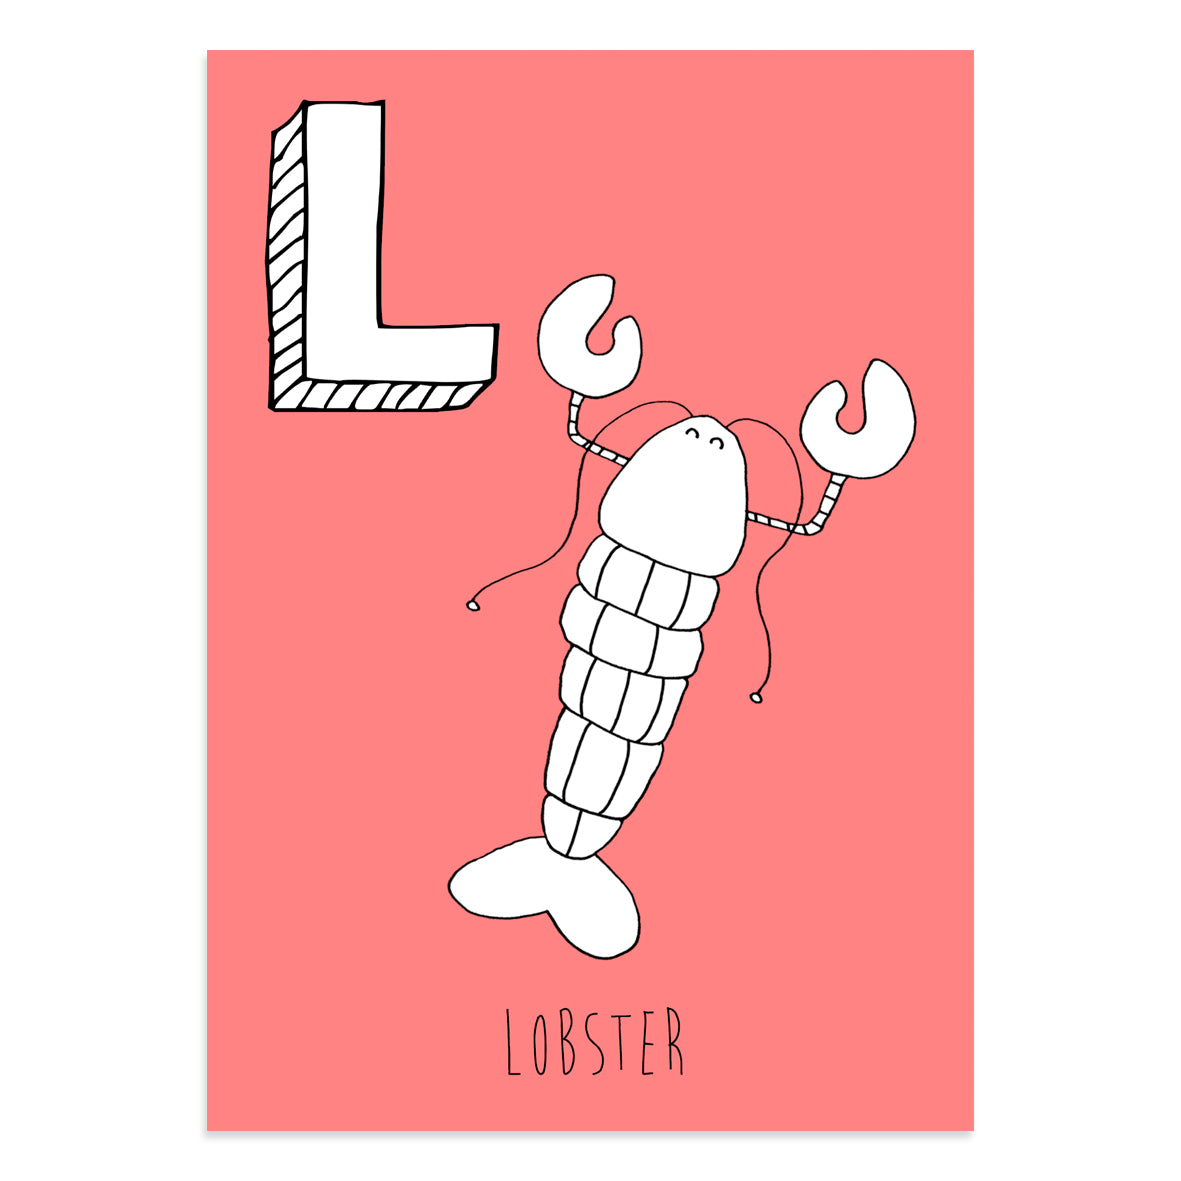 Red postcard featuring an L for lobster